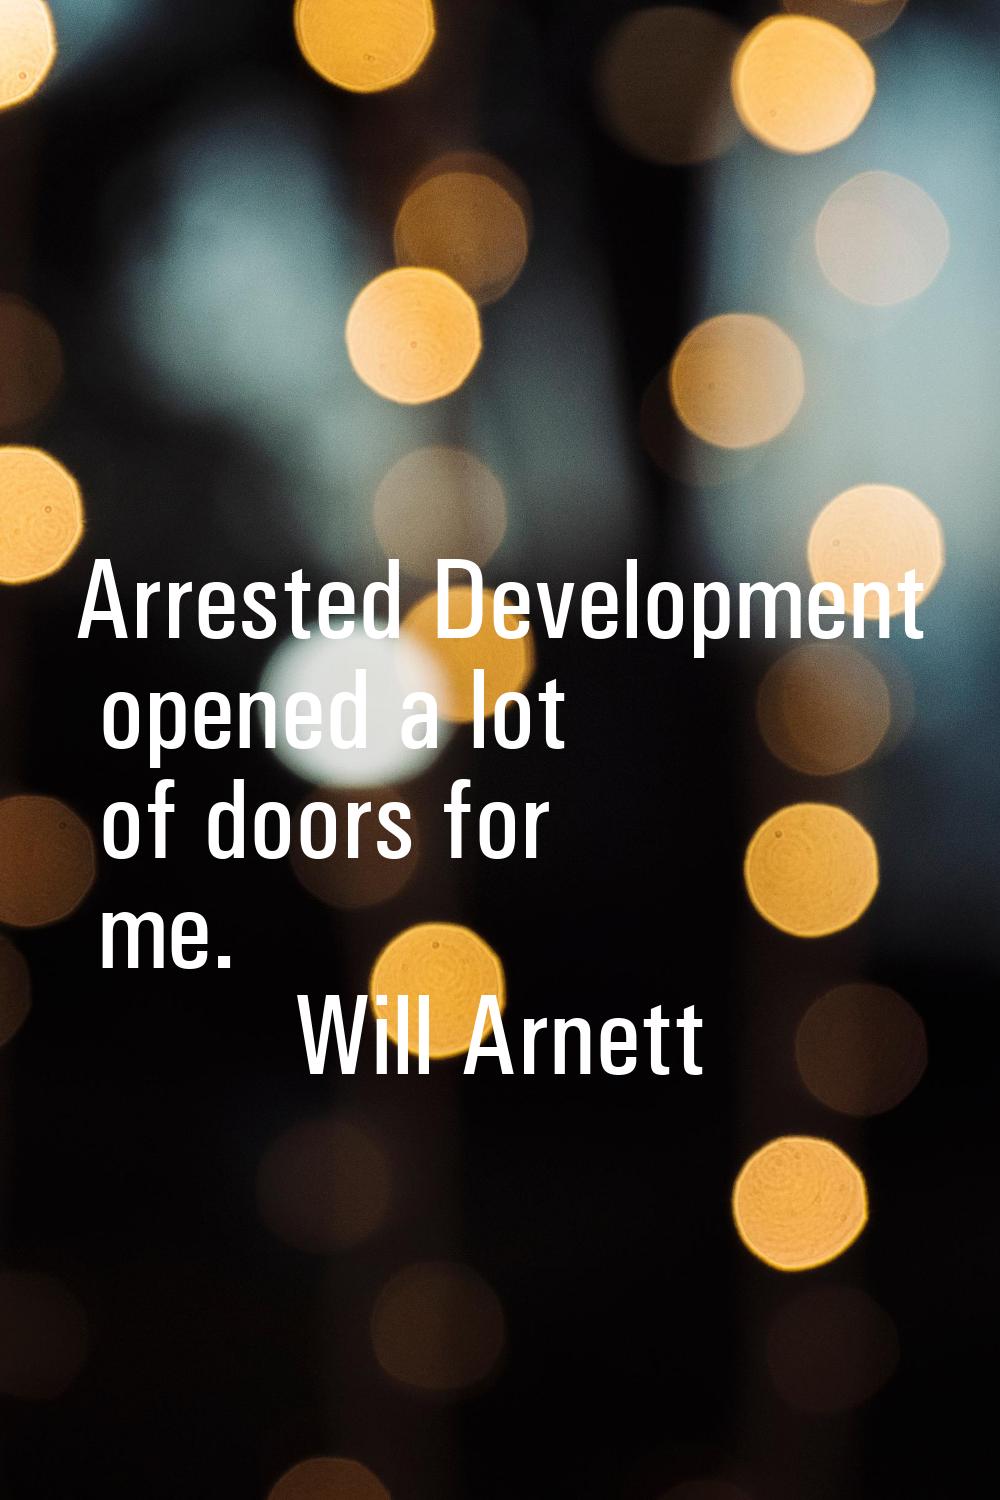 Arrested Development opened a lot of doors for me.